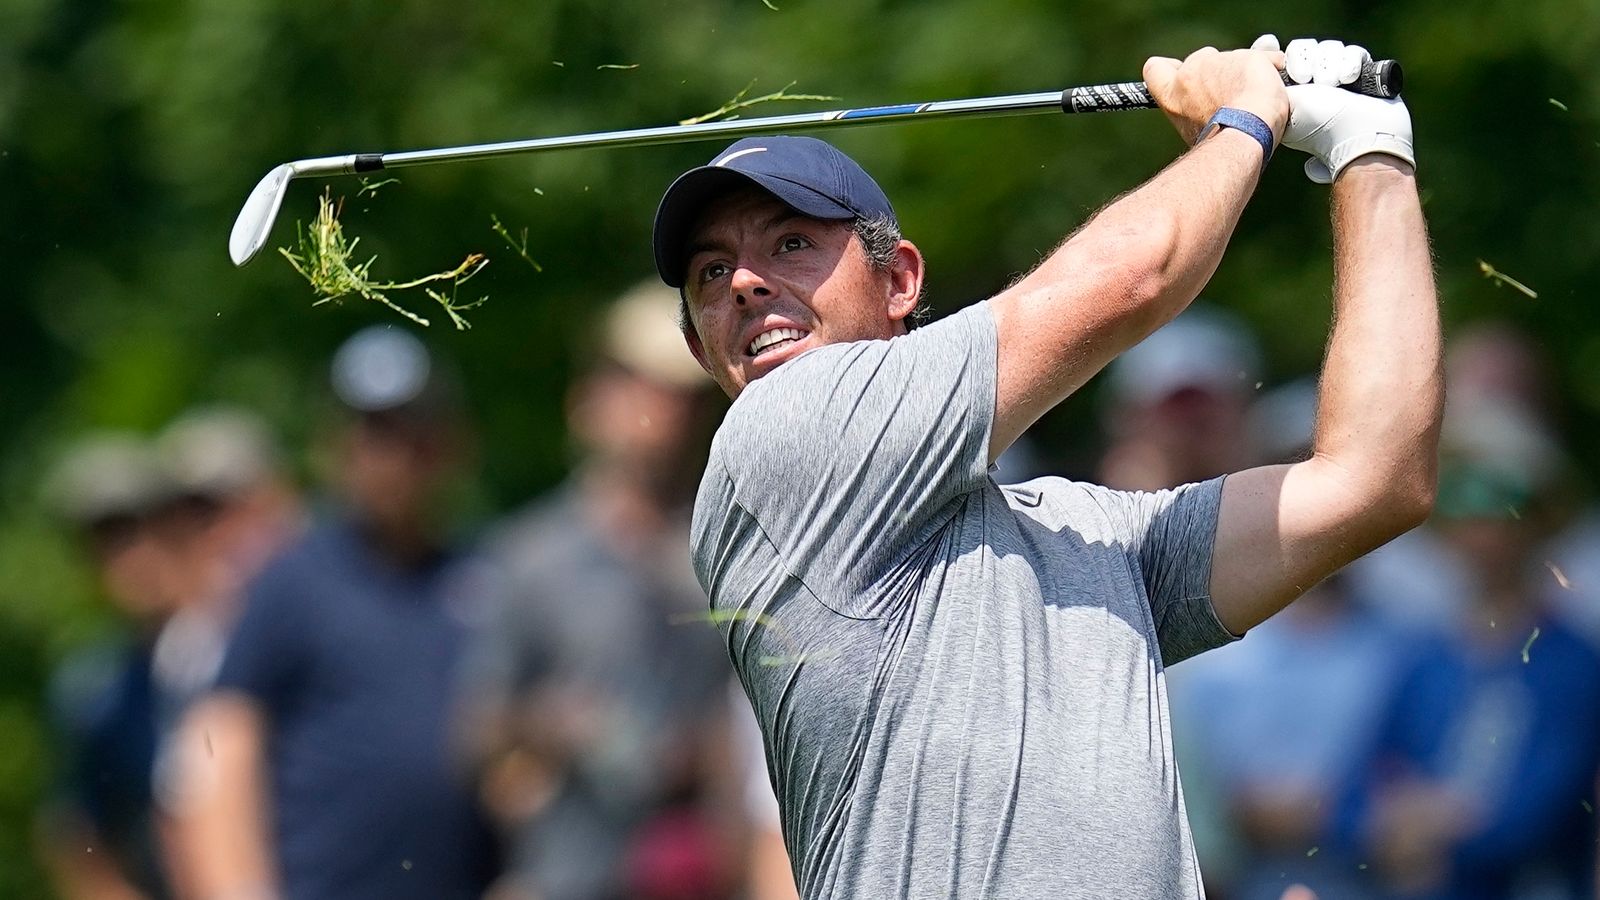 Rory McIlroy tied for lead at Memorial tournament | ‘I’m battling and hanging in there!’ | Golf News